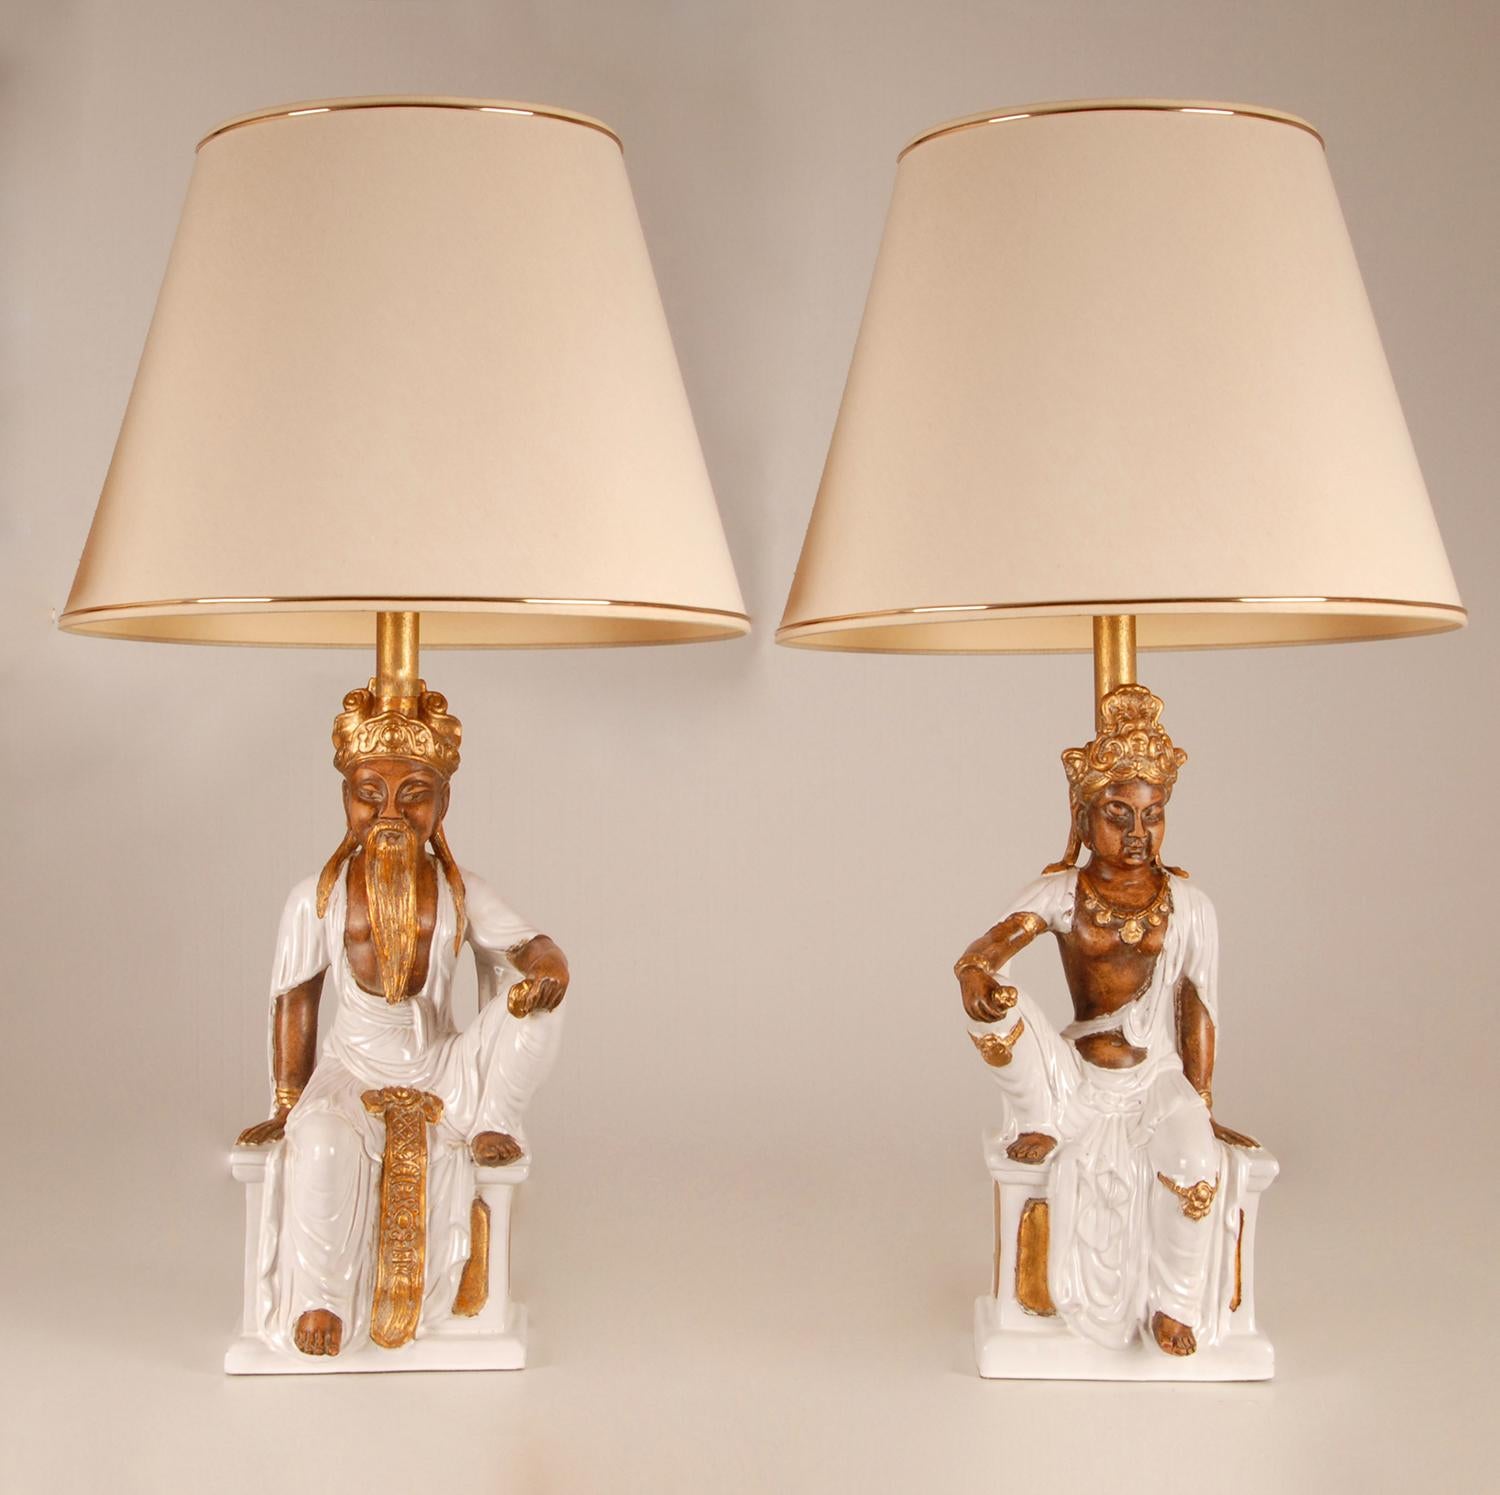 Vintage Ceramic Table Lamps Italian Chinoiserie Chinese Buddha figures Ceramic For Sale 4